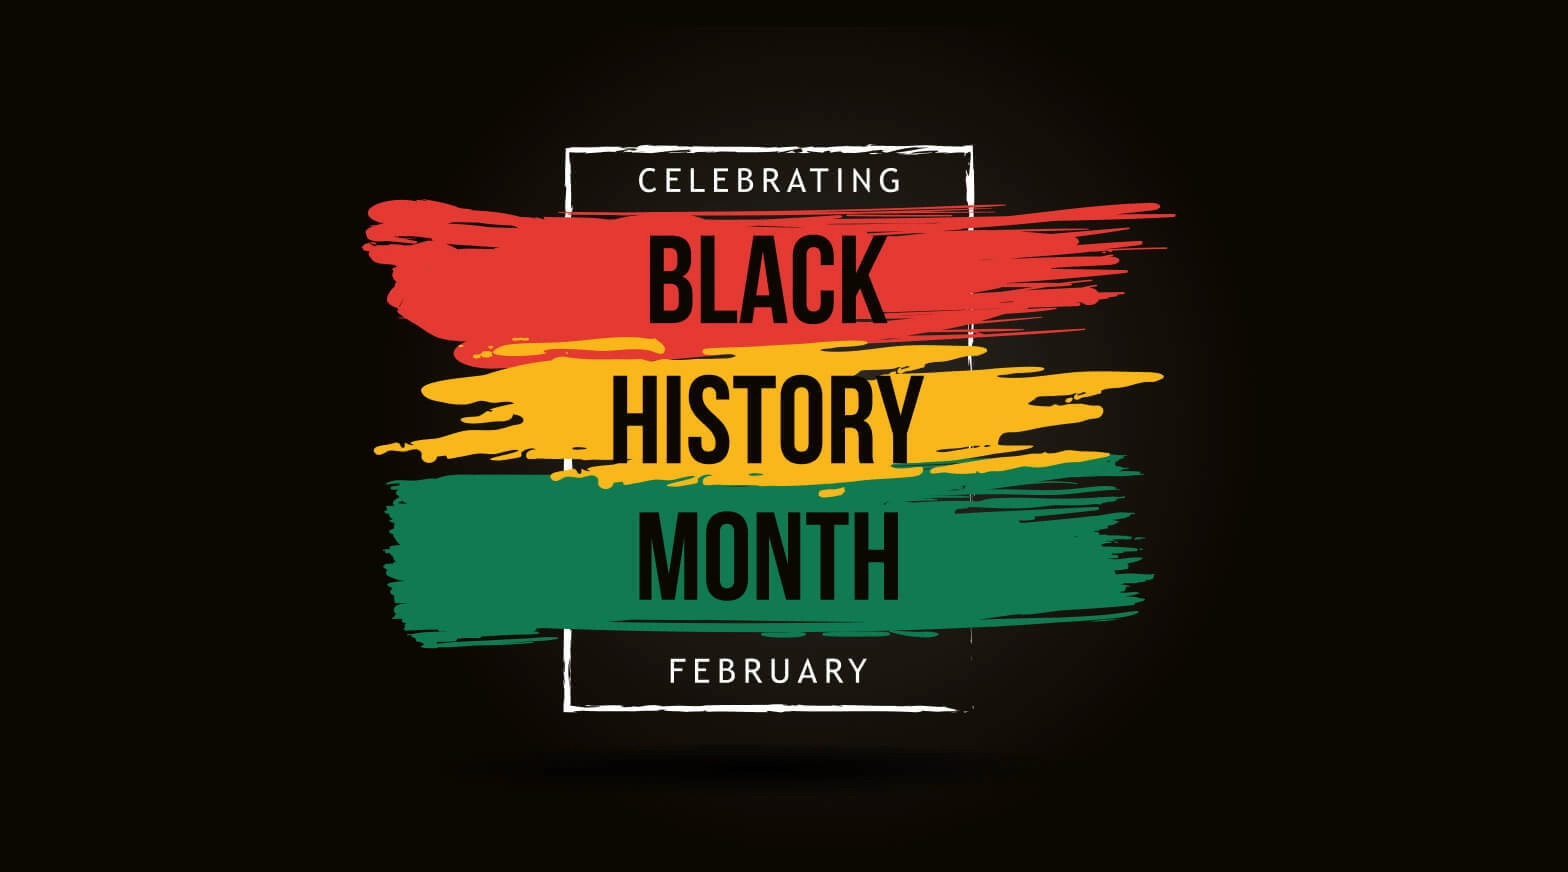 How to Virtually Celebrate (And Continue Celebrating) Black History Month